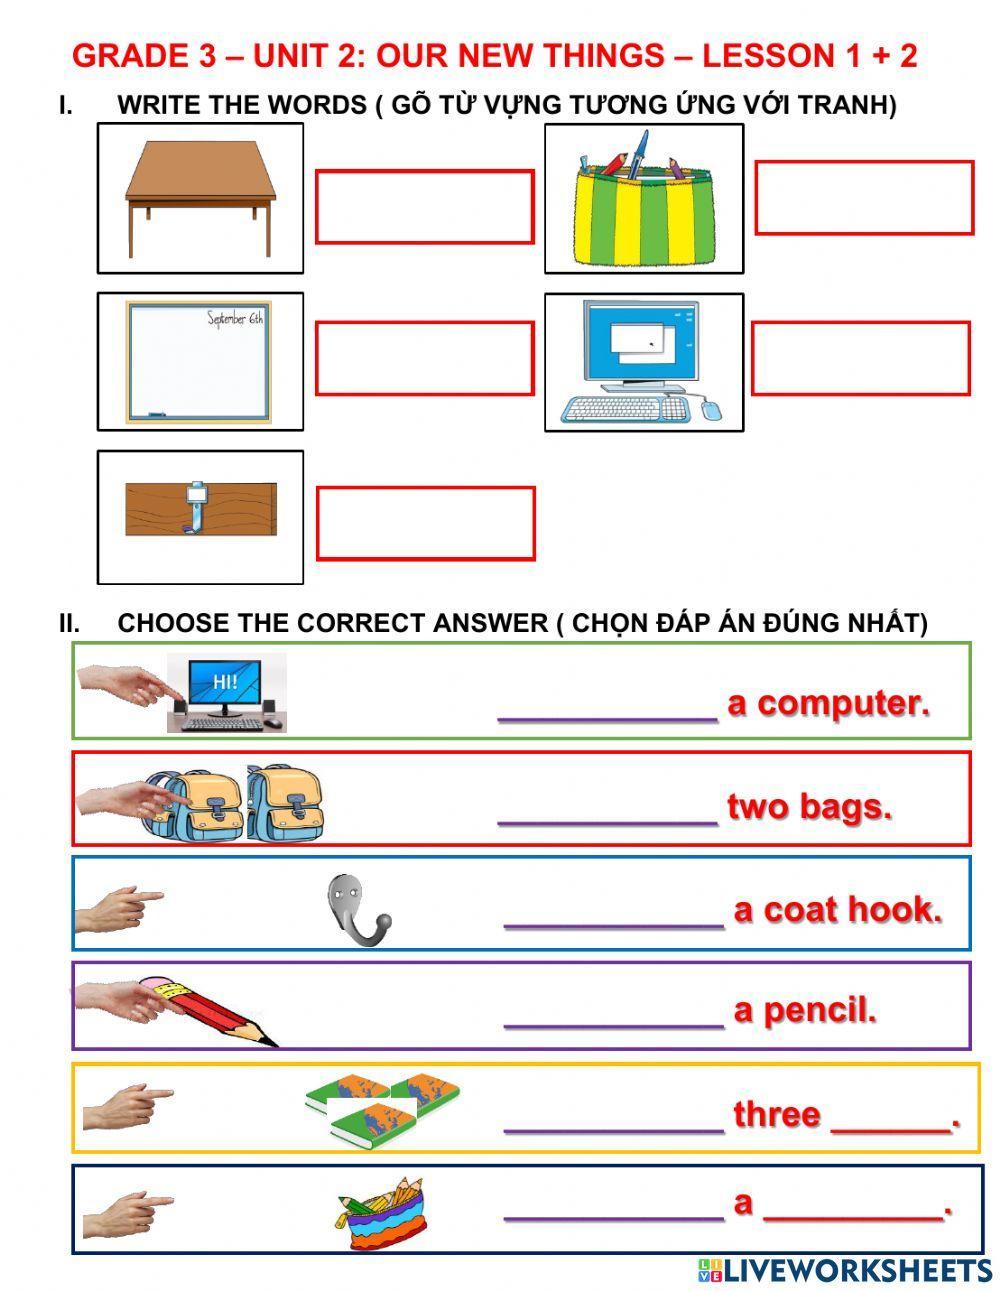 Grade 3 - unit 2: our new things - lesson 1, 2